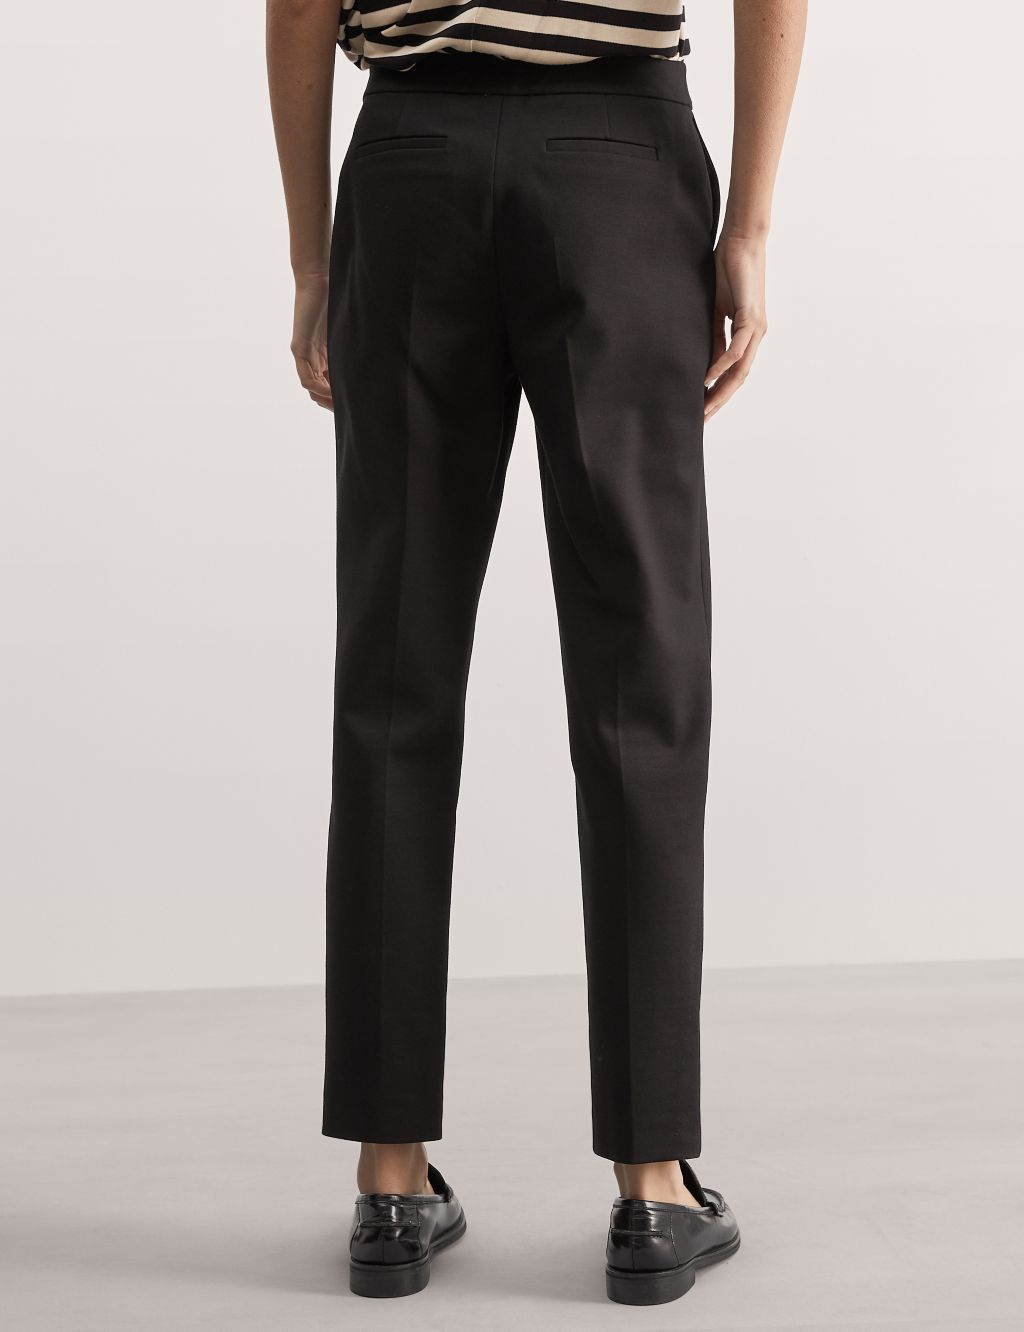 Jersey Slim Fit Trousers image 5